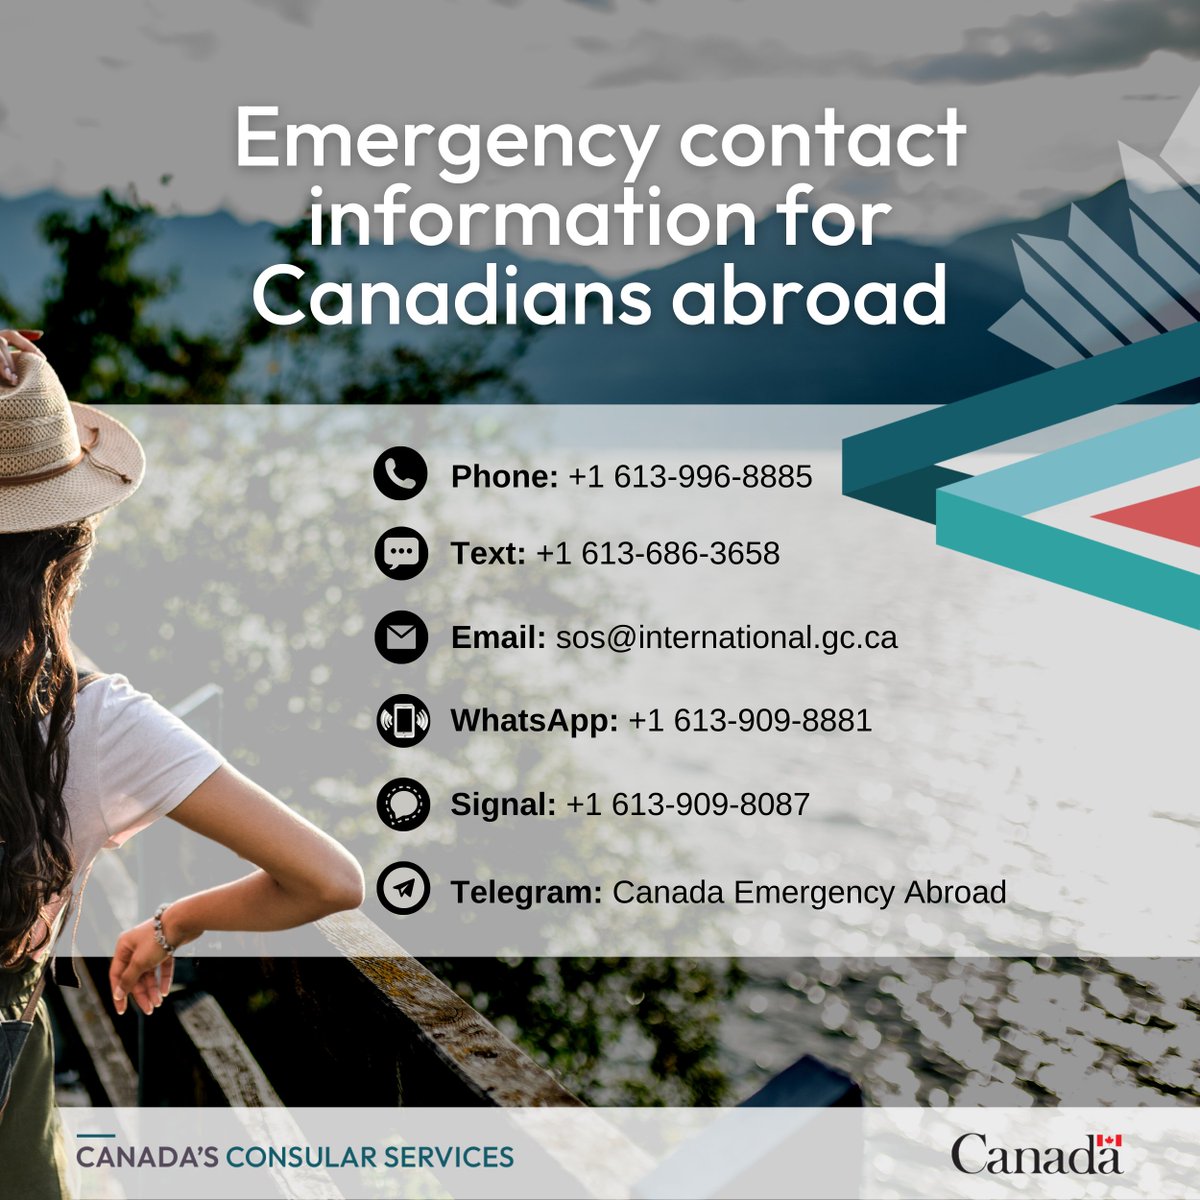 Are you abroad and need consular assistance? Our consular officials are here to help 24/7. Learn about how to contact us in case of emergency: ow.ly/tIYB50RApqP